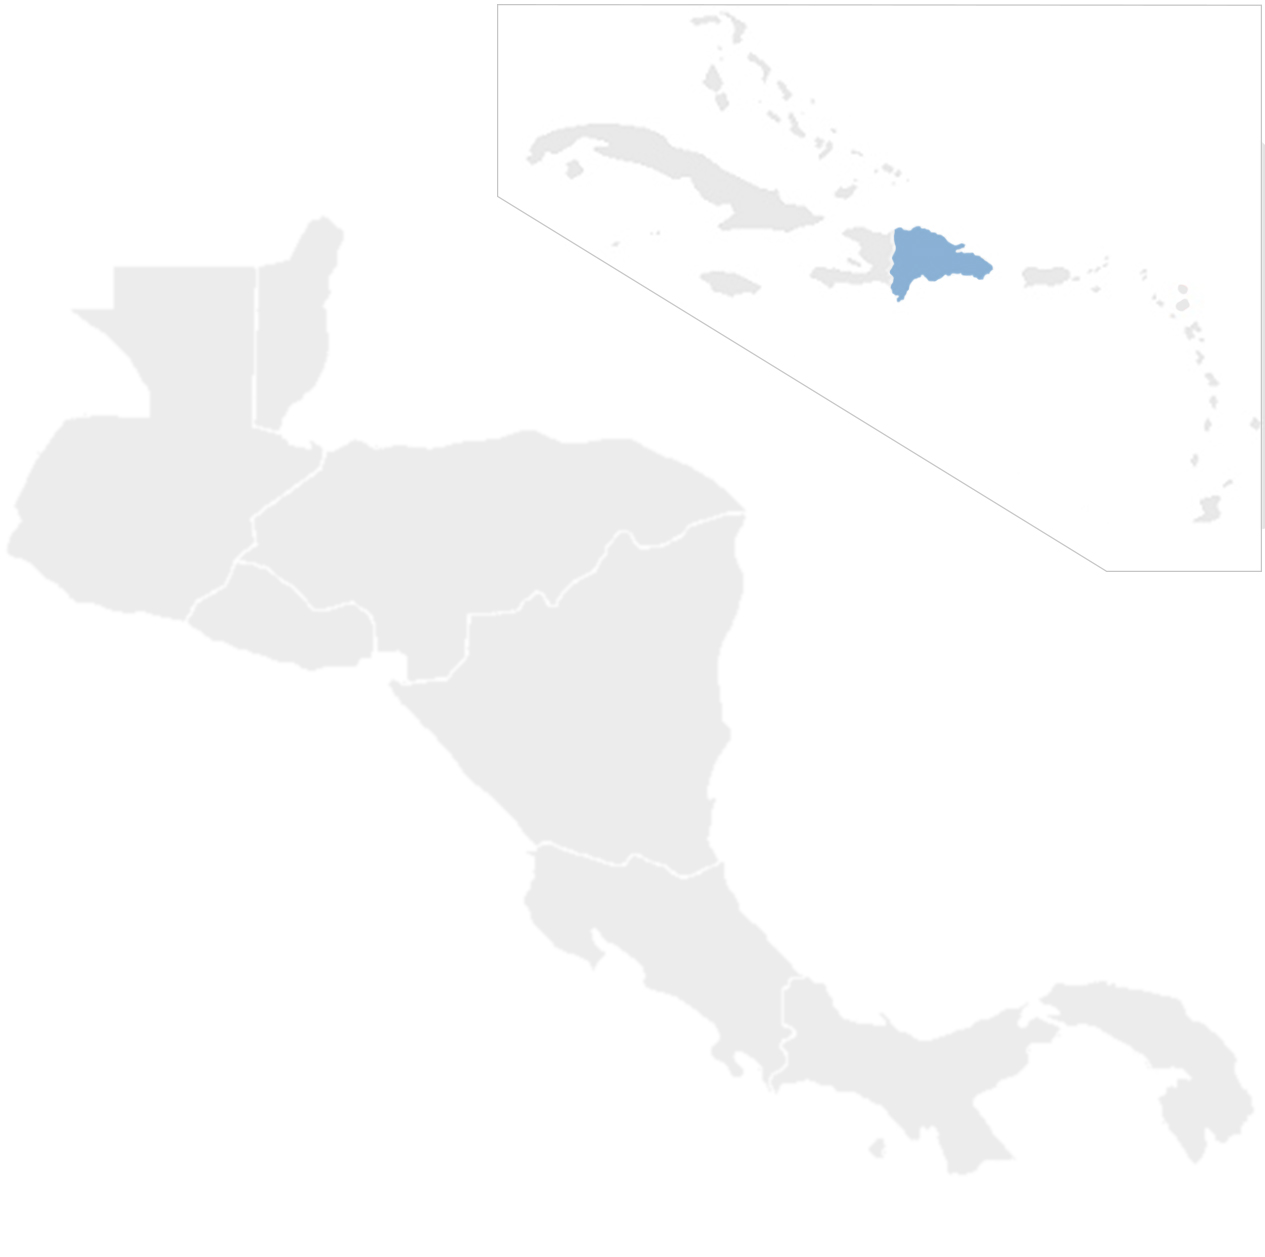 Gray map of Central America and the Caribbean with the Dominican Republic in blue